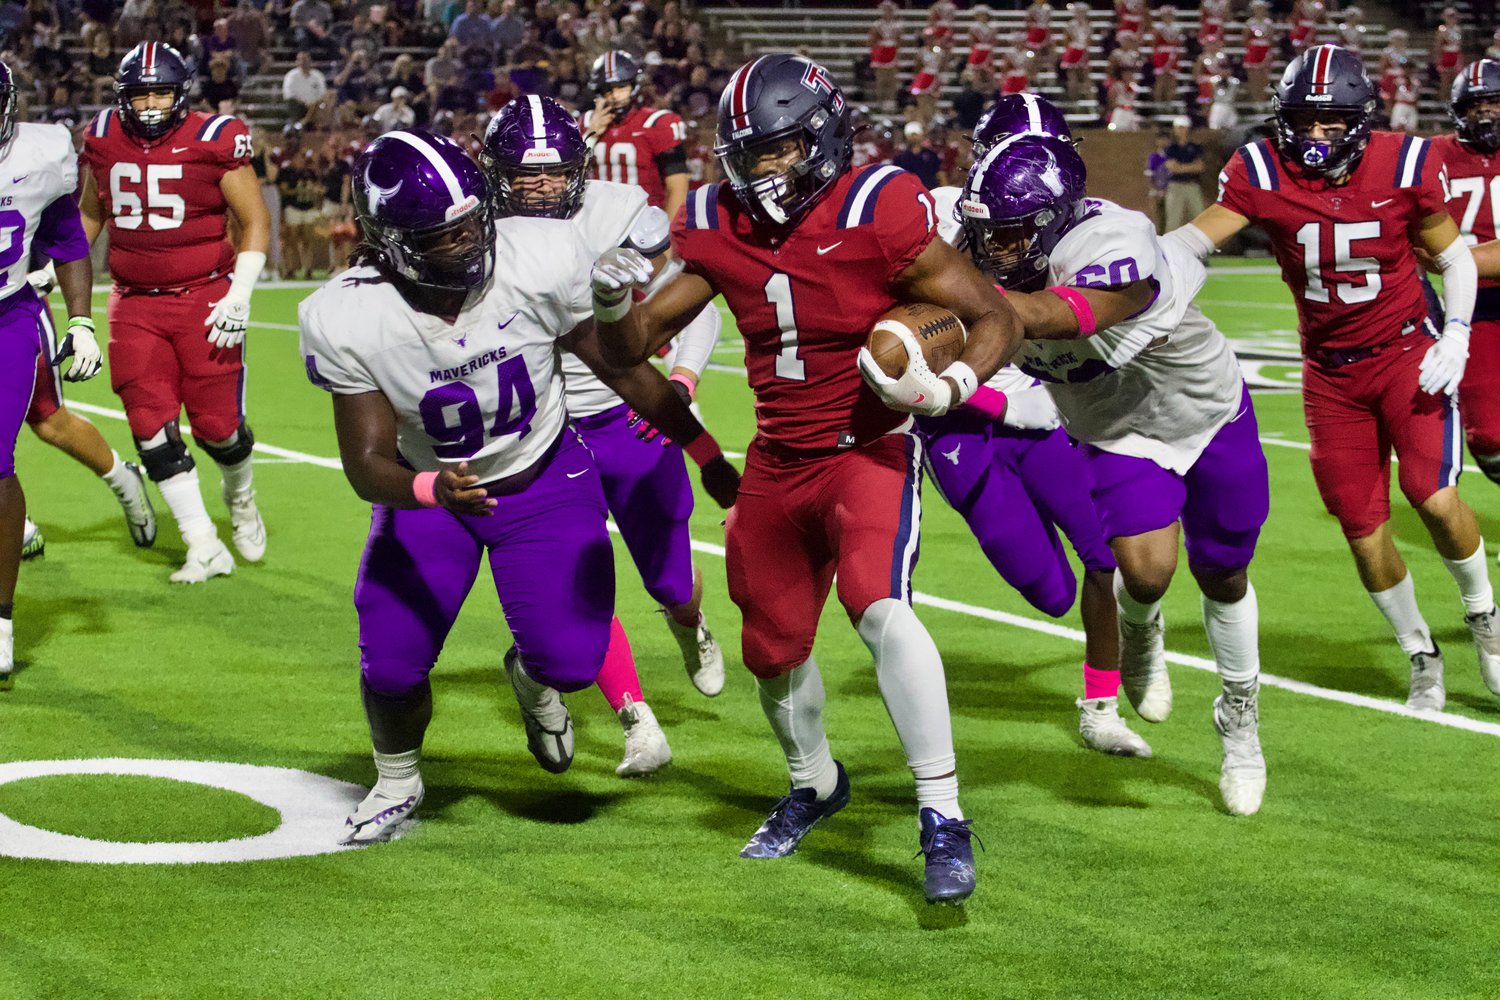 Caleb Komolafe tries to break tackles during Thursday's game between Tompkins and Morton Ranch at Rhodes Stadium.